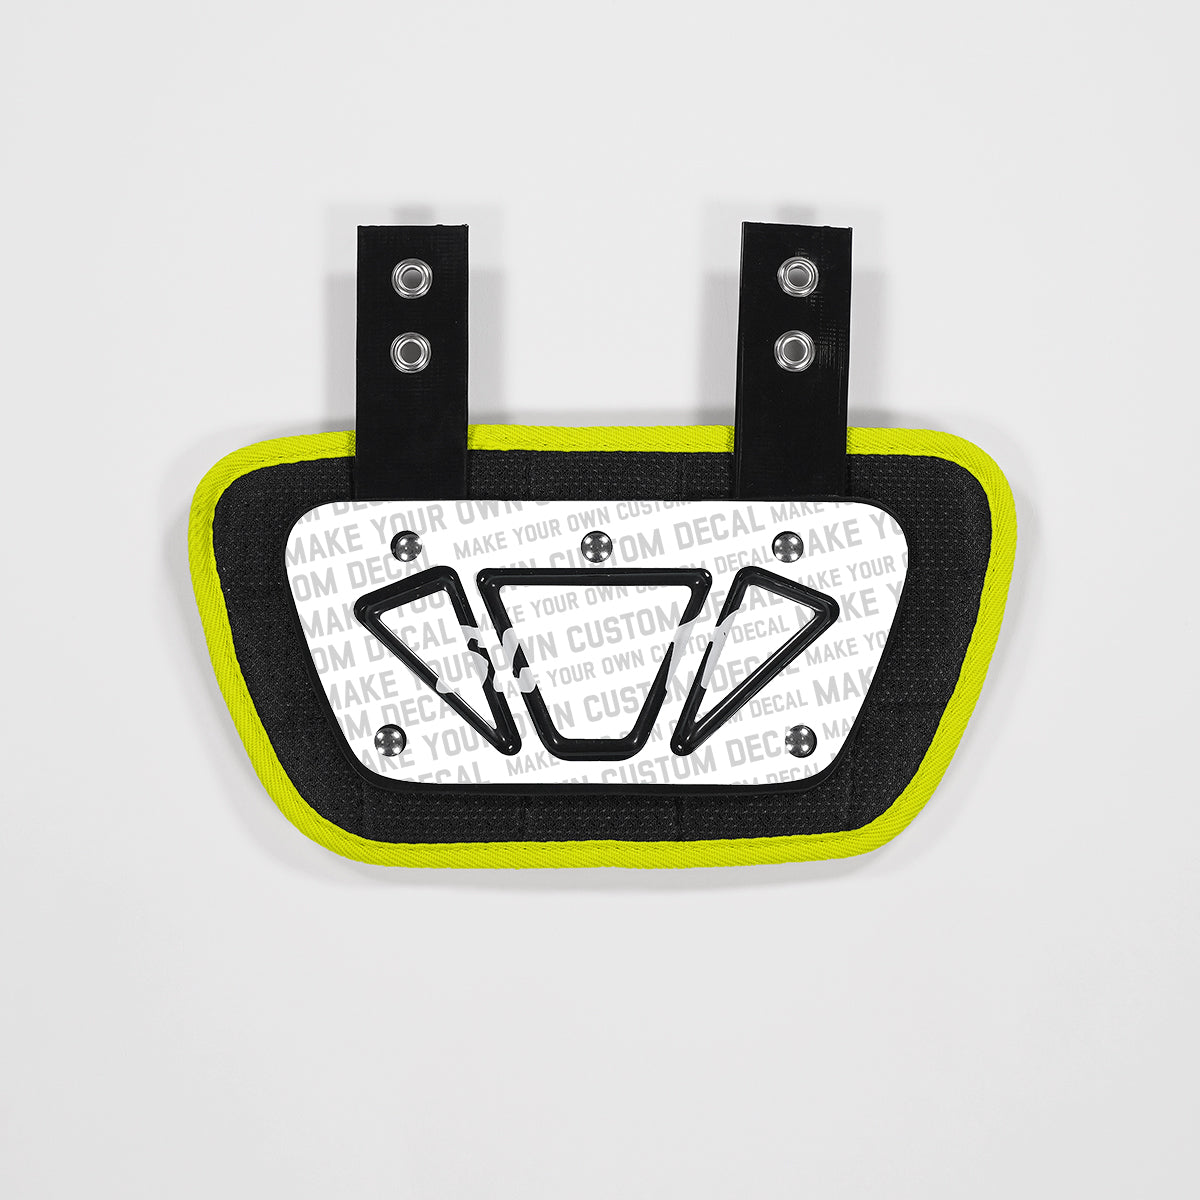 Decorated Football Back Plates for Adults, Youth